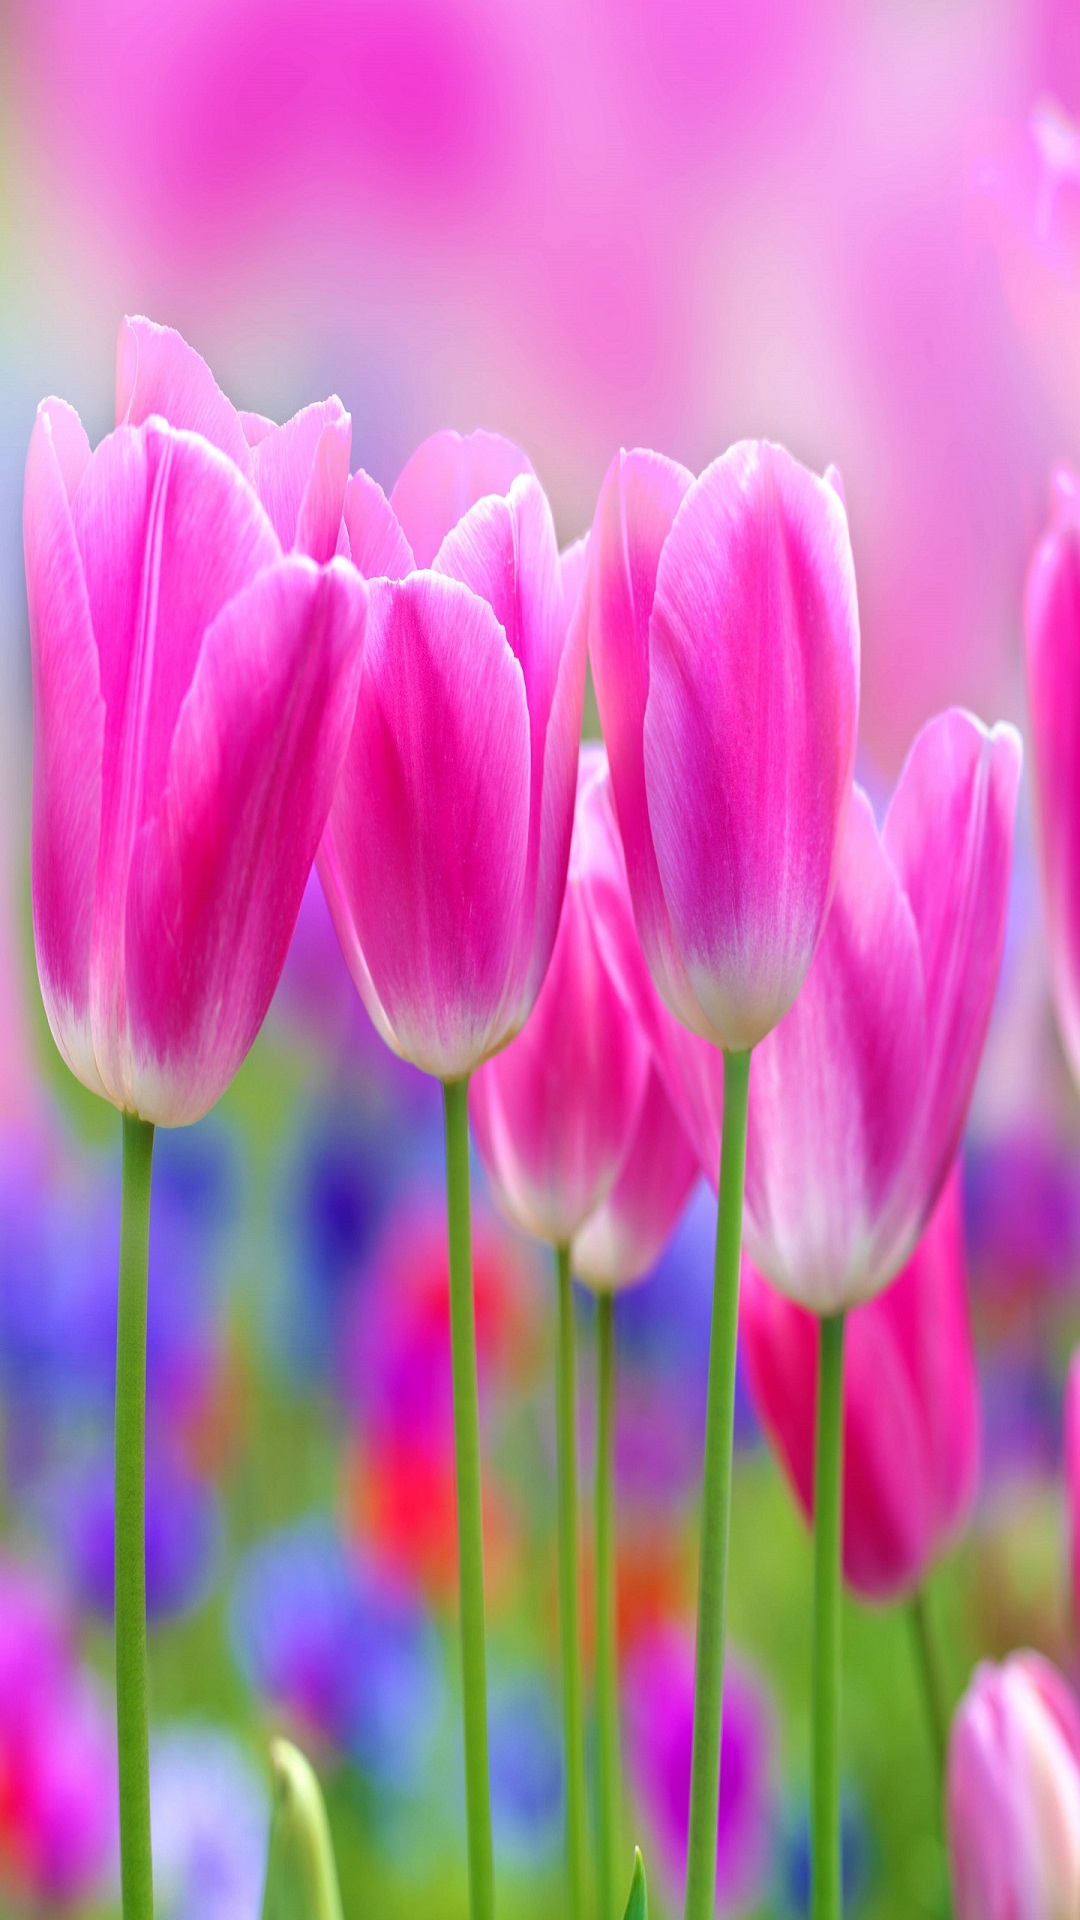 Pink Tulips for Apple iPhone 6S & 7 Plus resolution